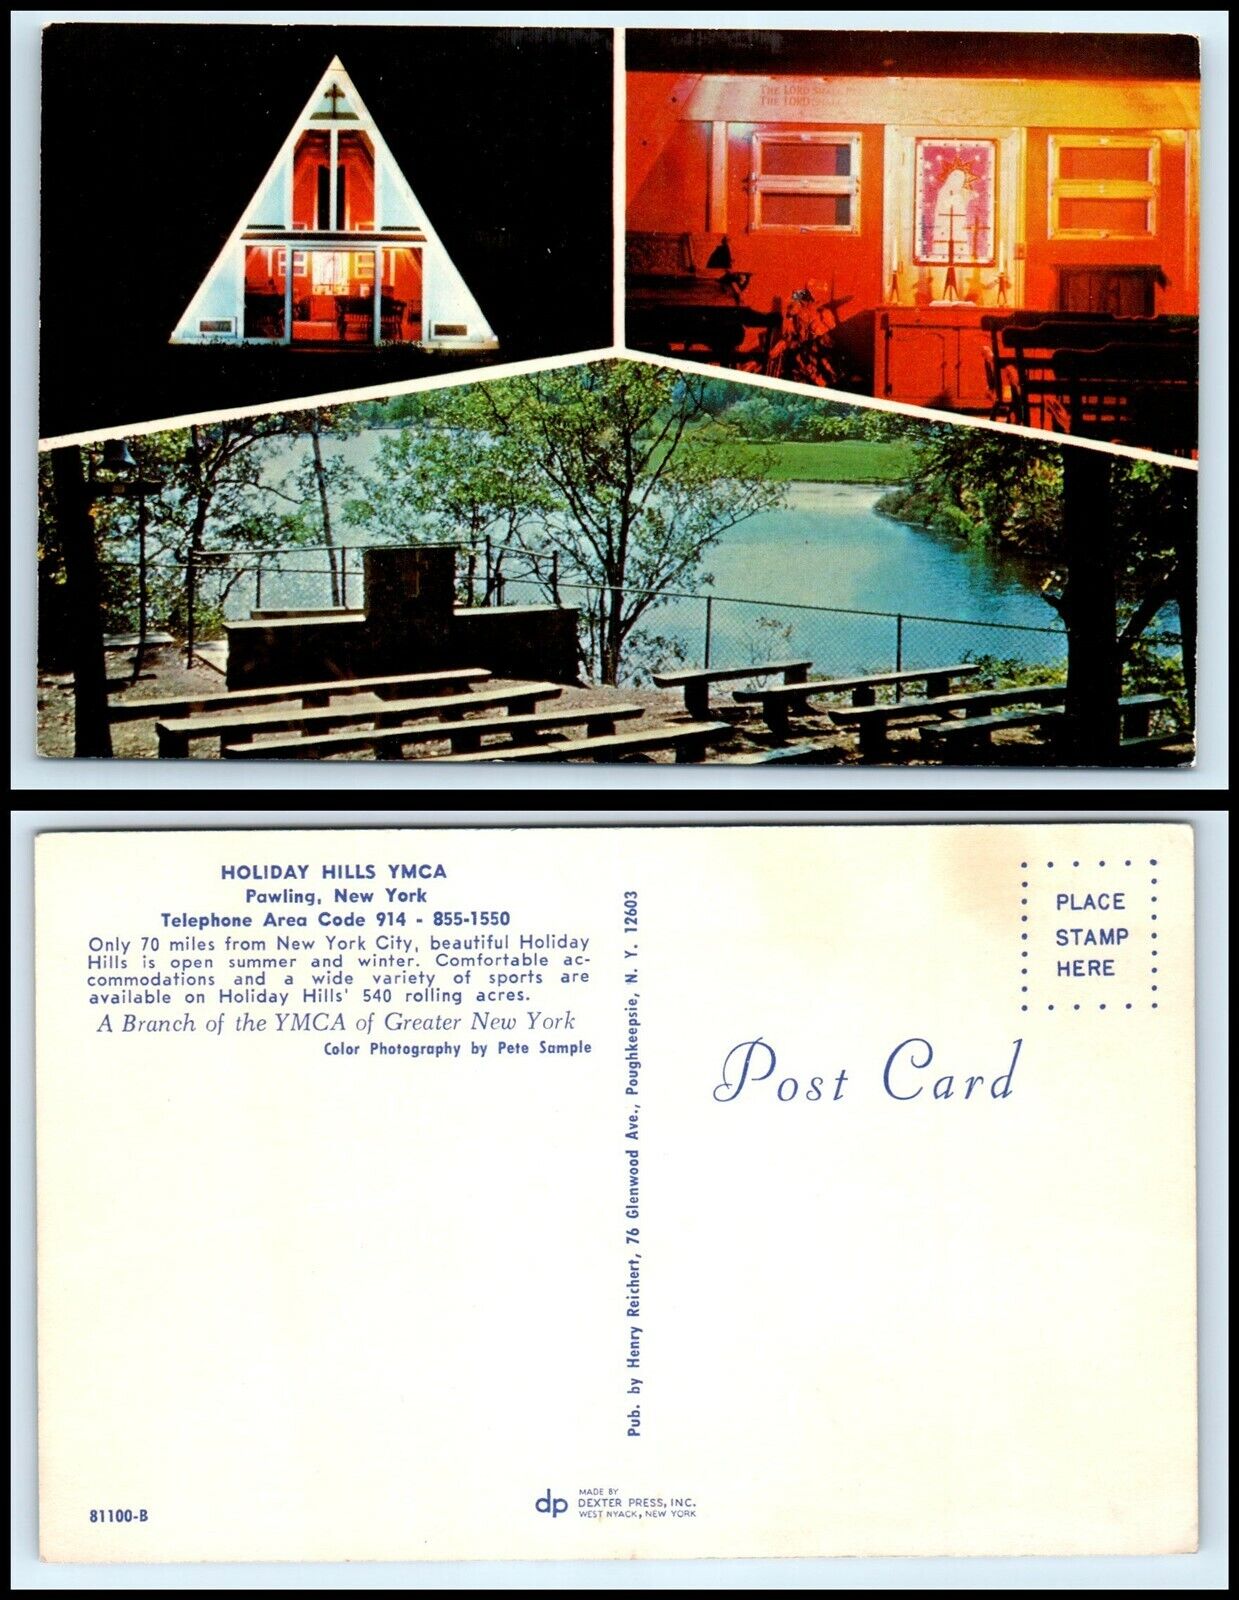 NEW YORK Postcard - Pawling, Holiday Hills YMCA S14